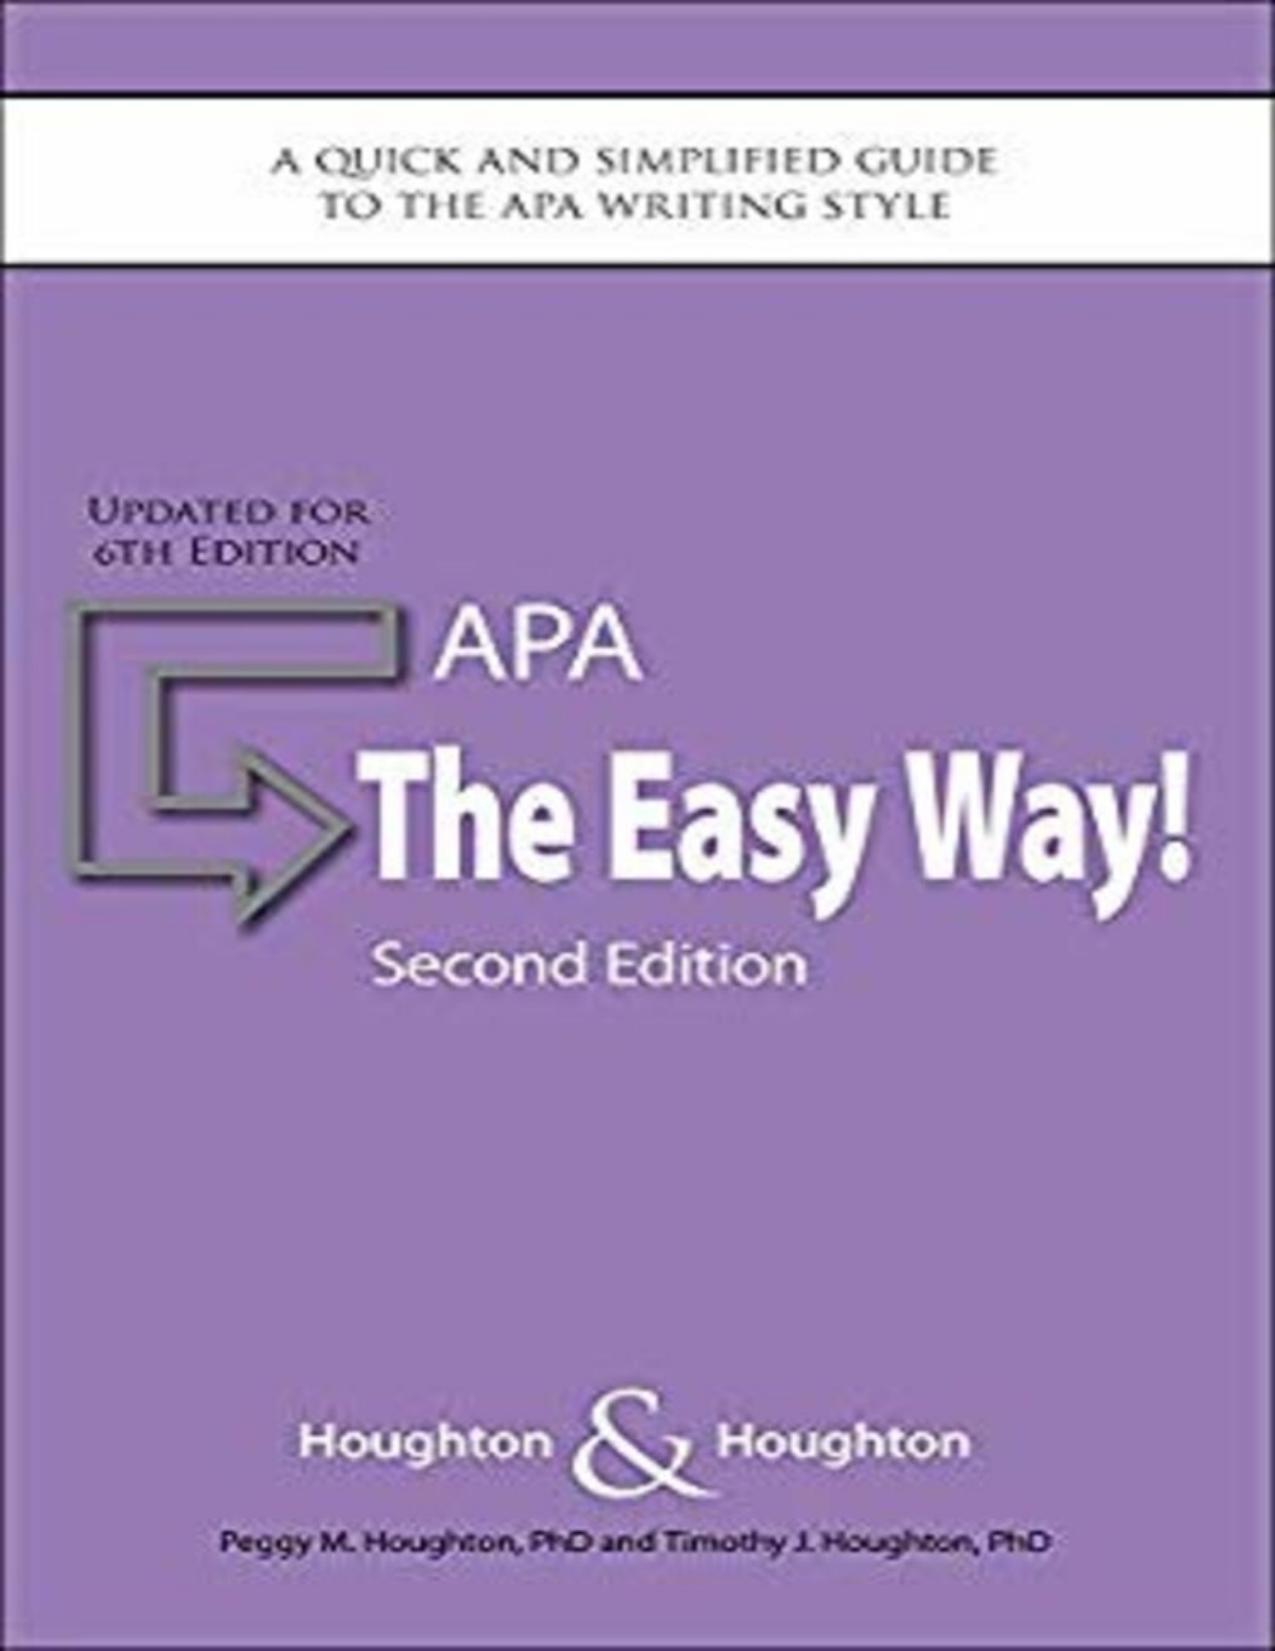 APA_ The Easy Way! (Updated for APA 6th edition) - Peggy M. Houghton; Ph.D.; Timothy J. Houghton.jpg